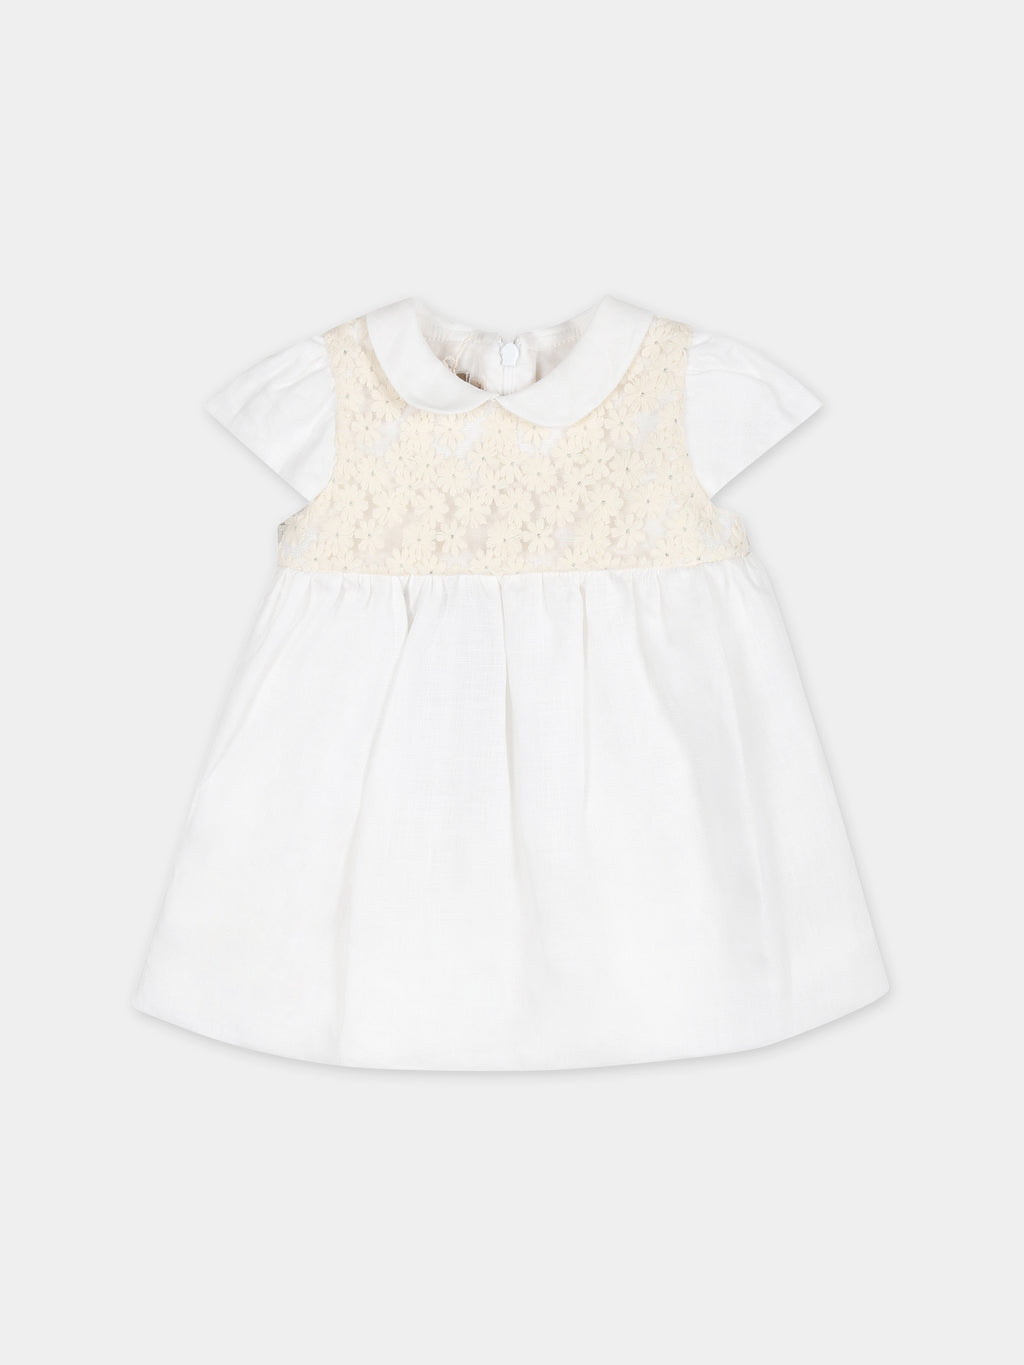 White dress for baby girl with little flowers